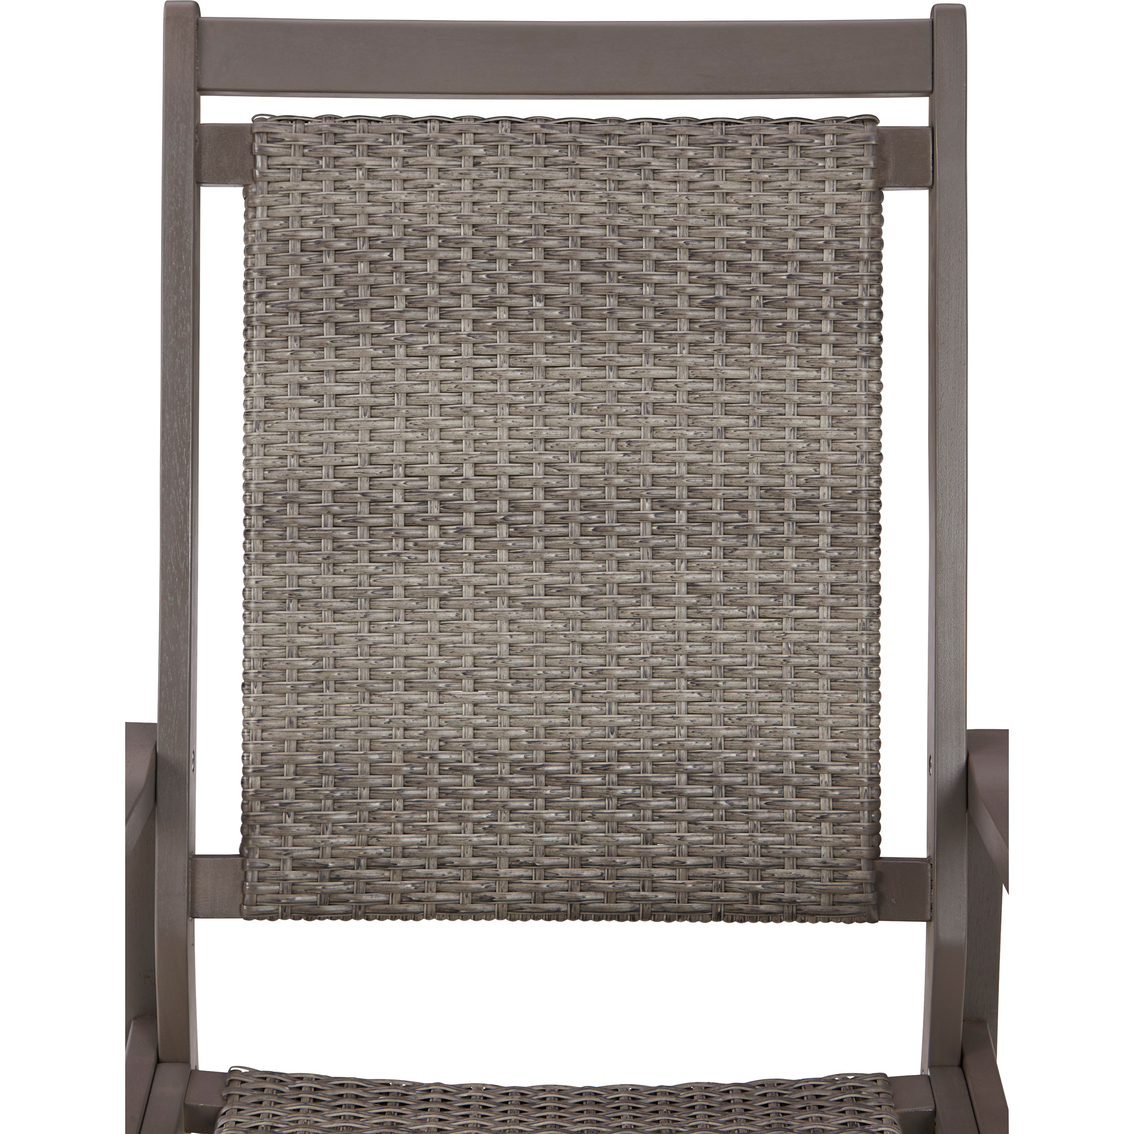 Signature Design by Ashley Emani Rocking Chair - Image 5 of 8